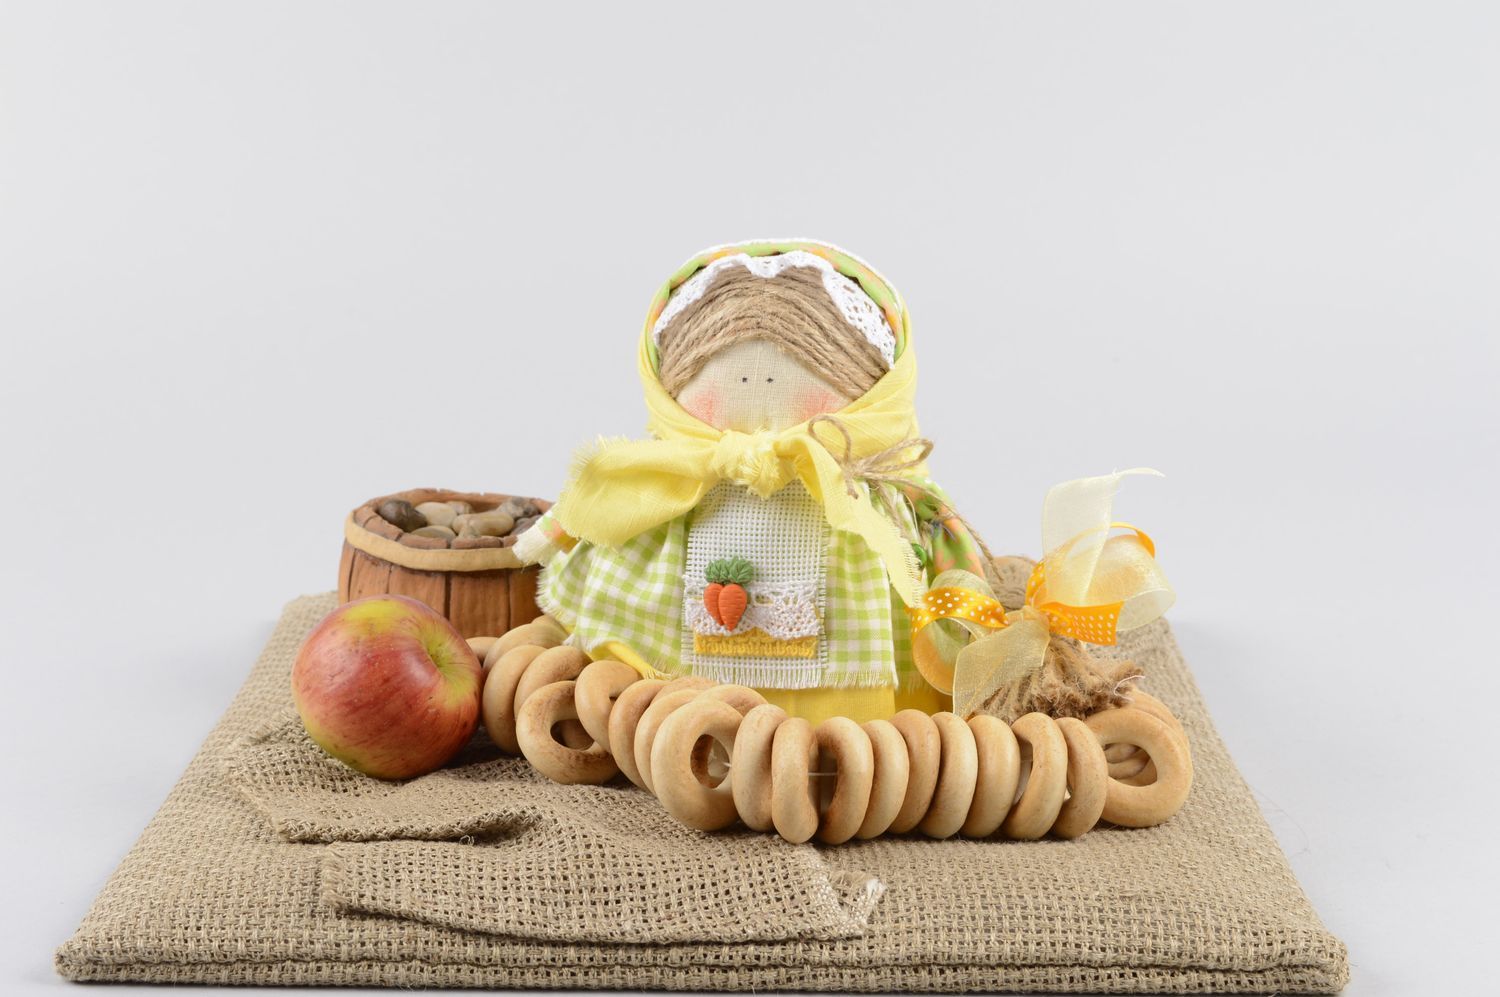 Handmade doll unusual doll decorative use only soft doll for baby gift ideas photo 5